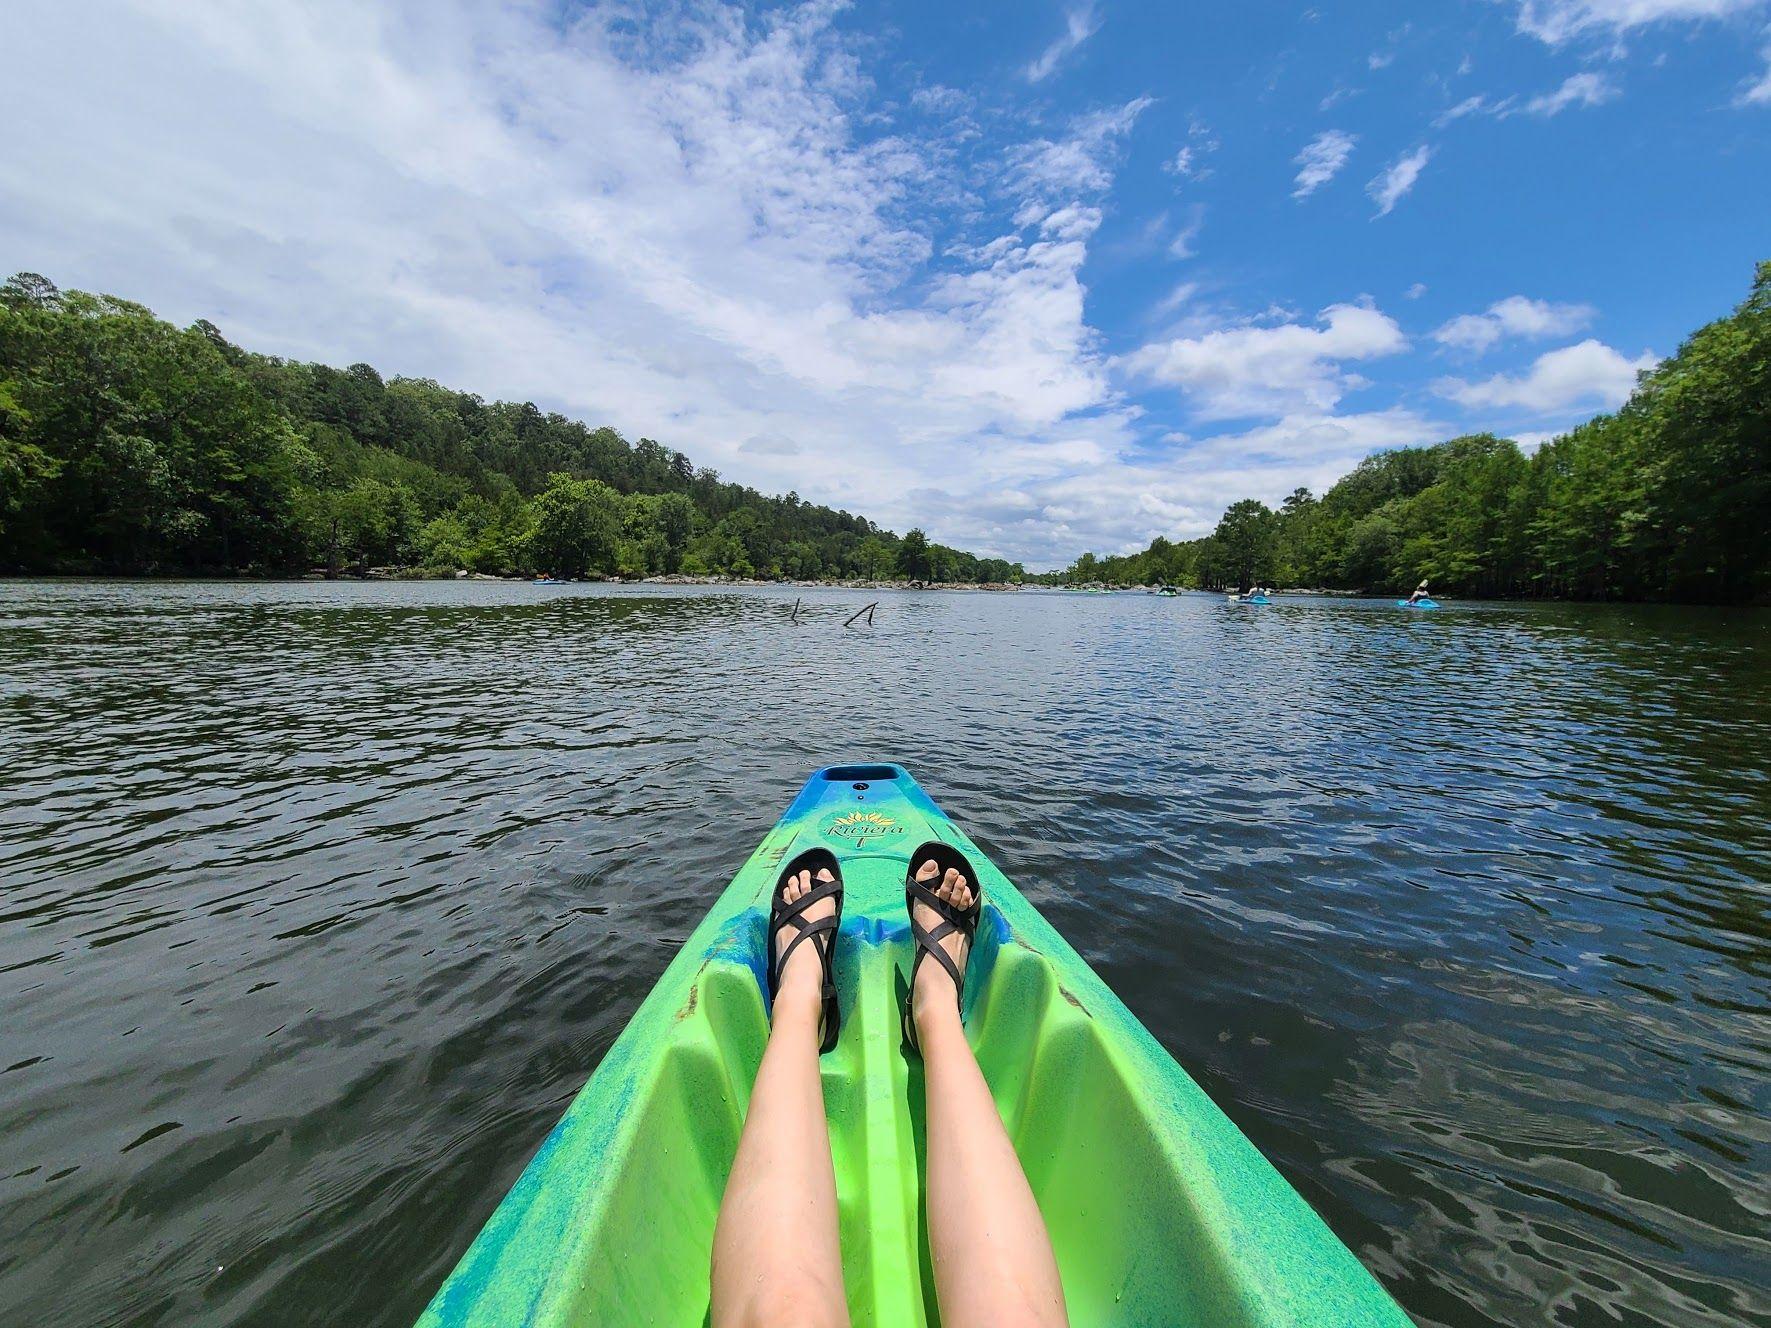 Looking at Lydia's feet on the kayak in the Mountain Fork River.